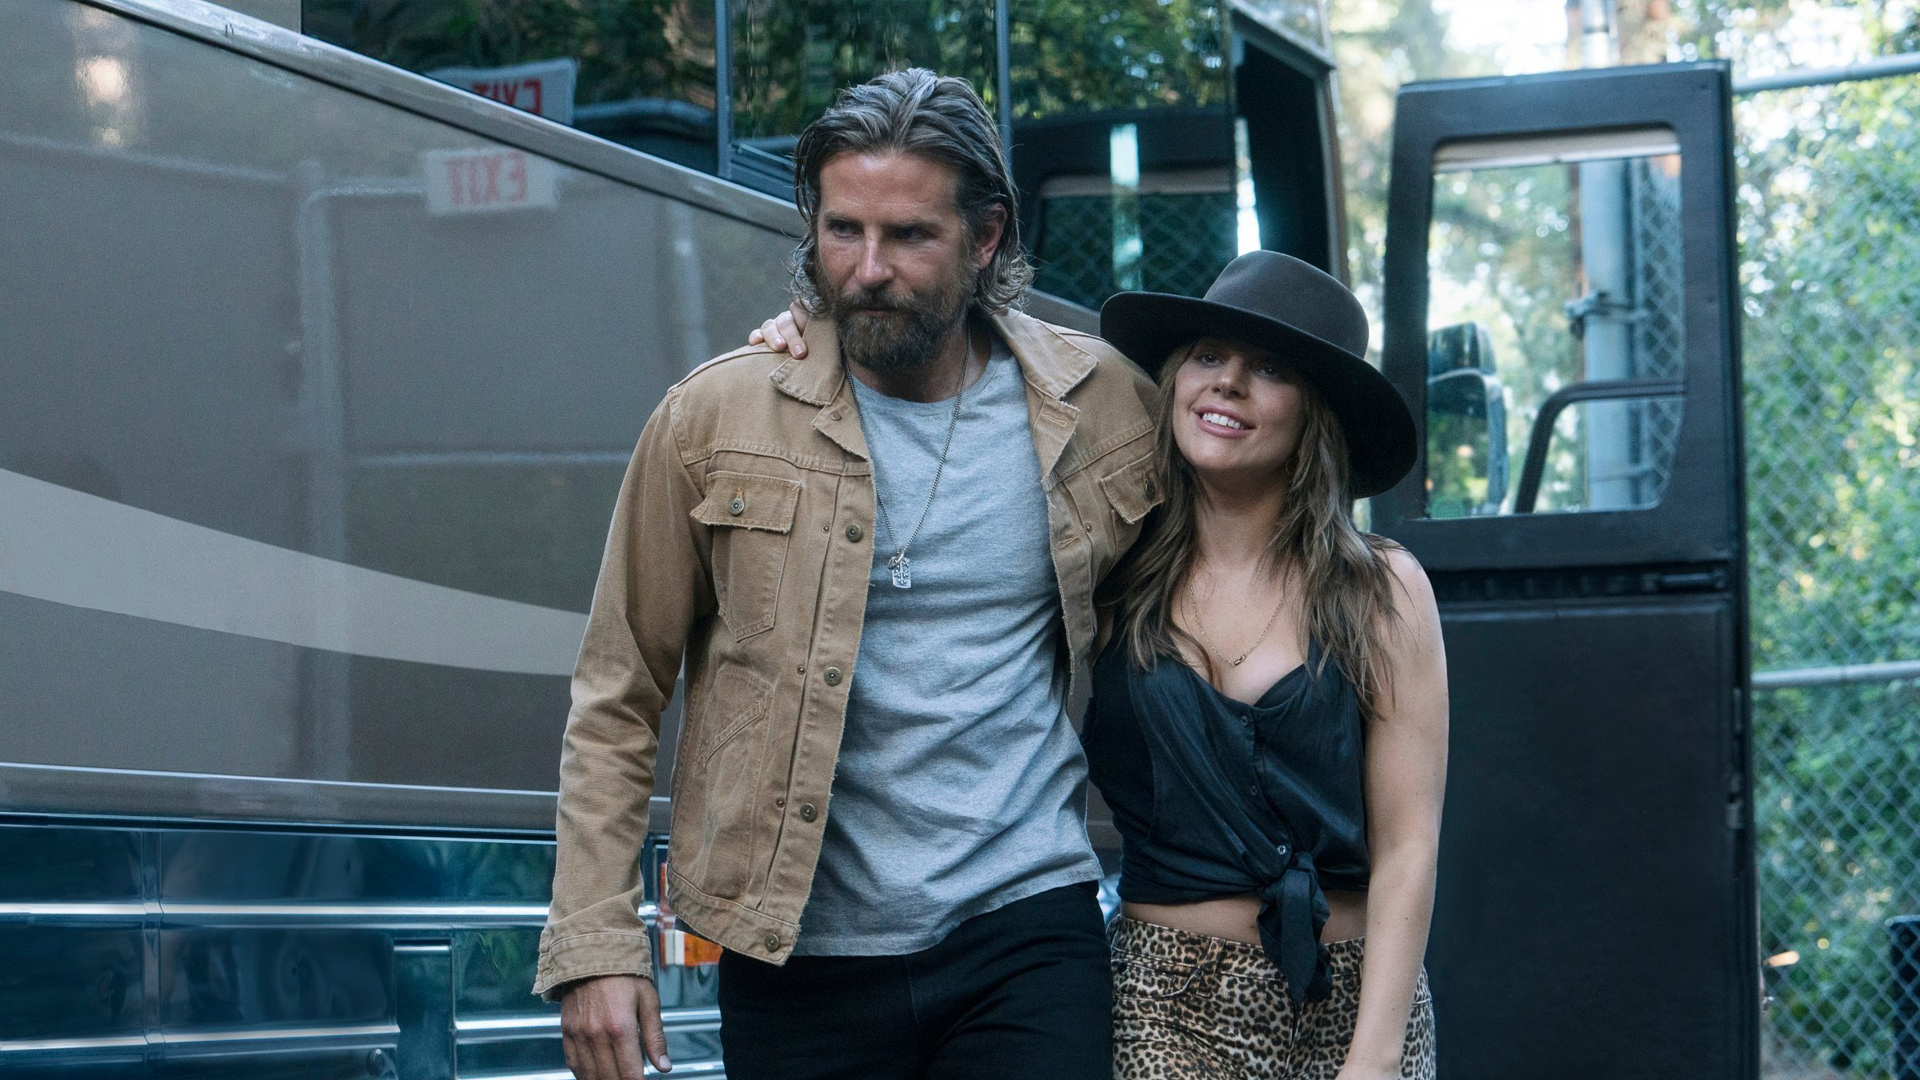 Jackson and Ally put their arms around each other in 2018's A Star Is Born remake